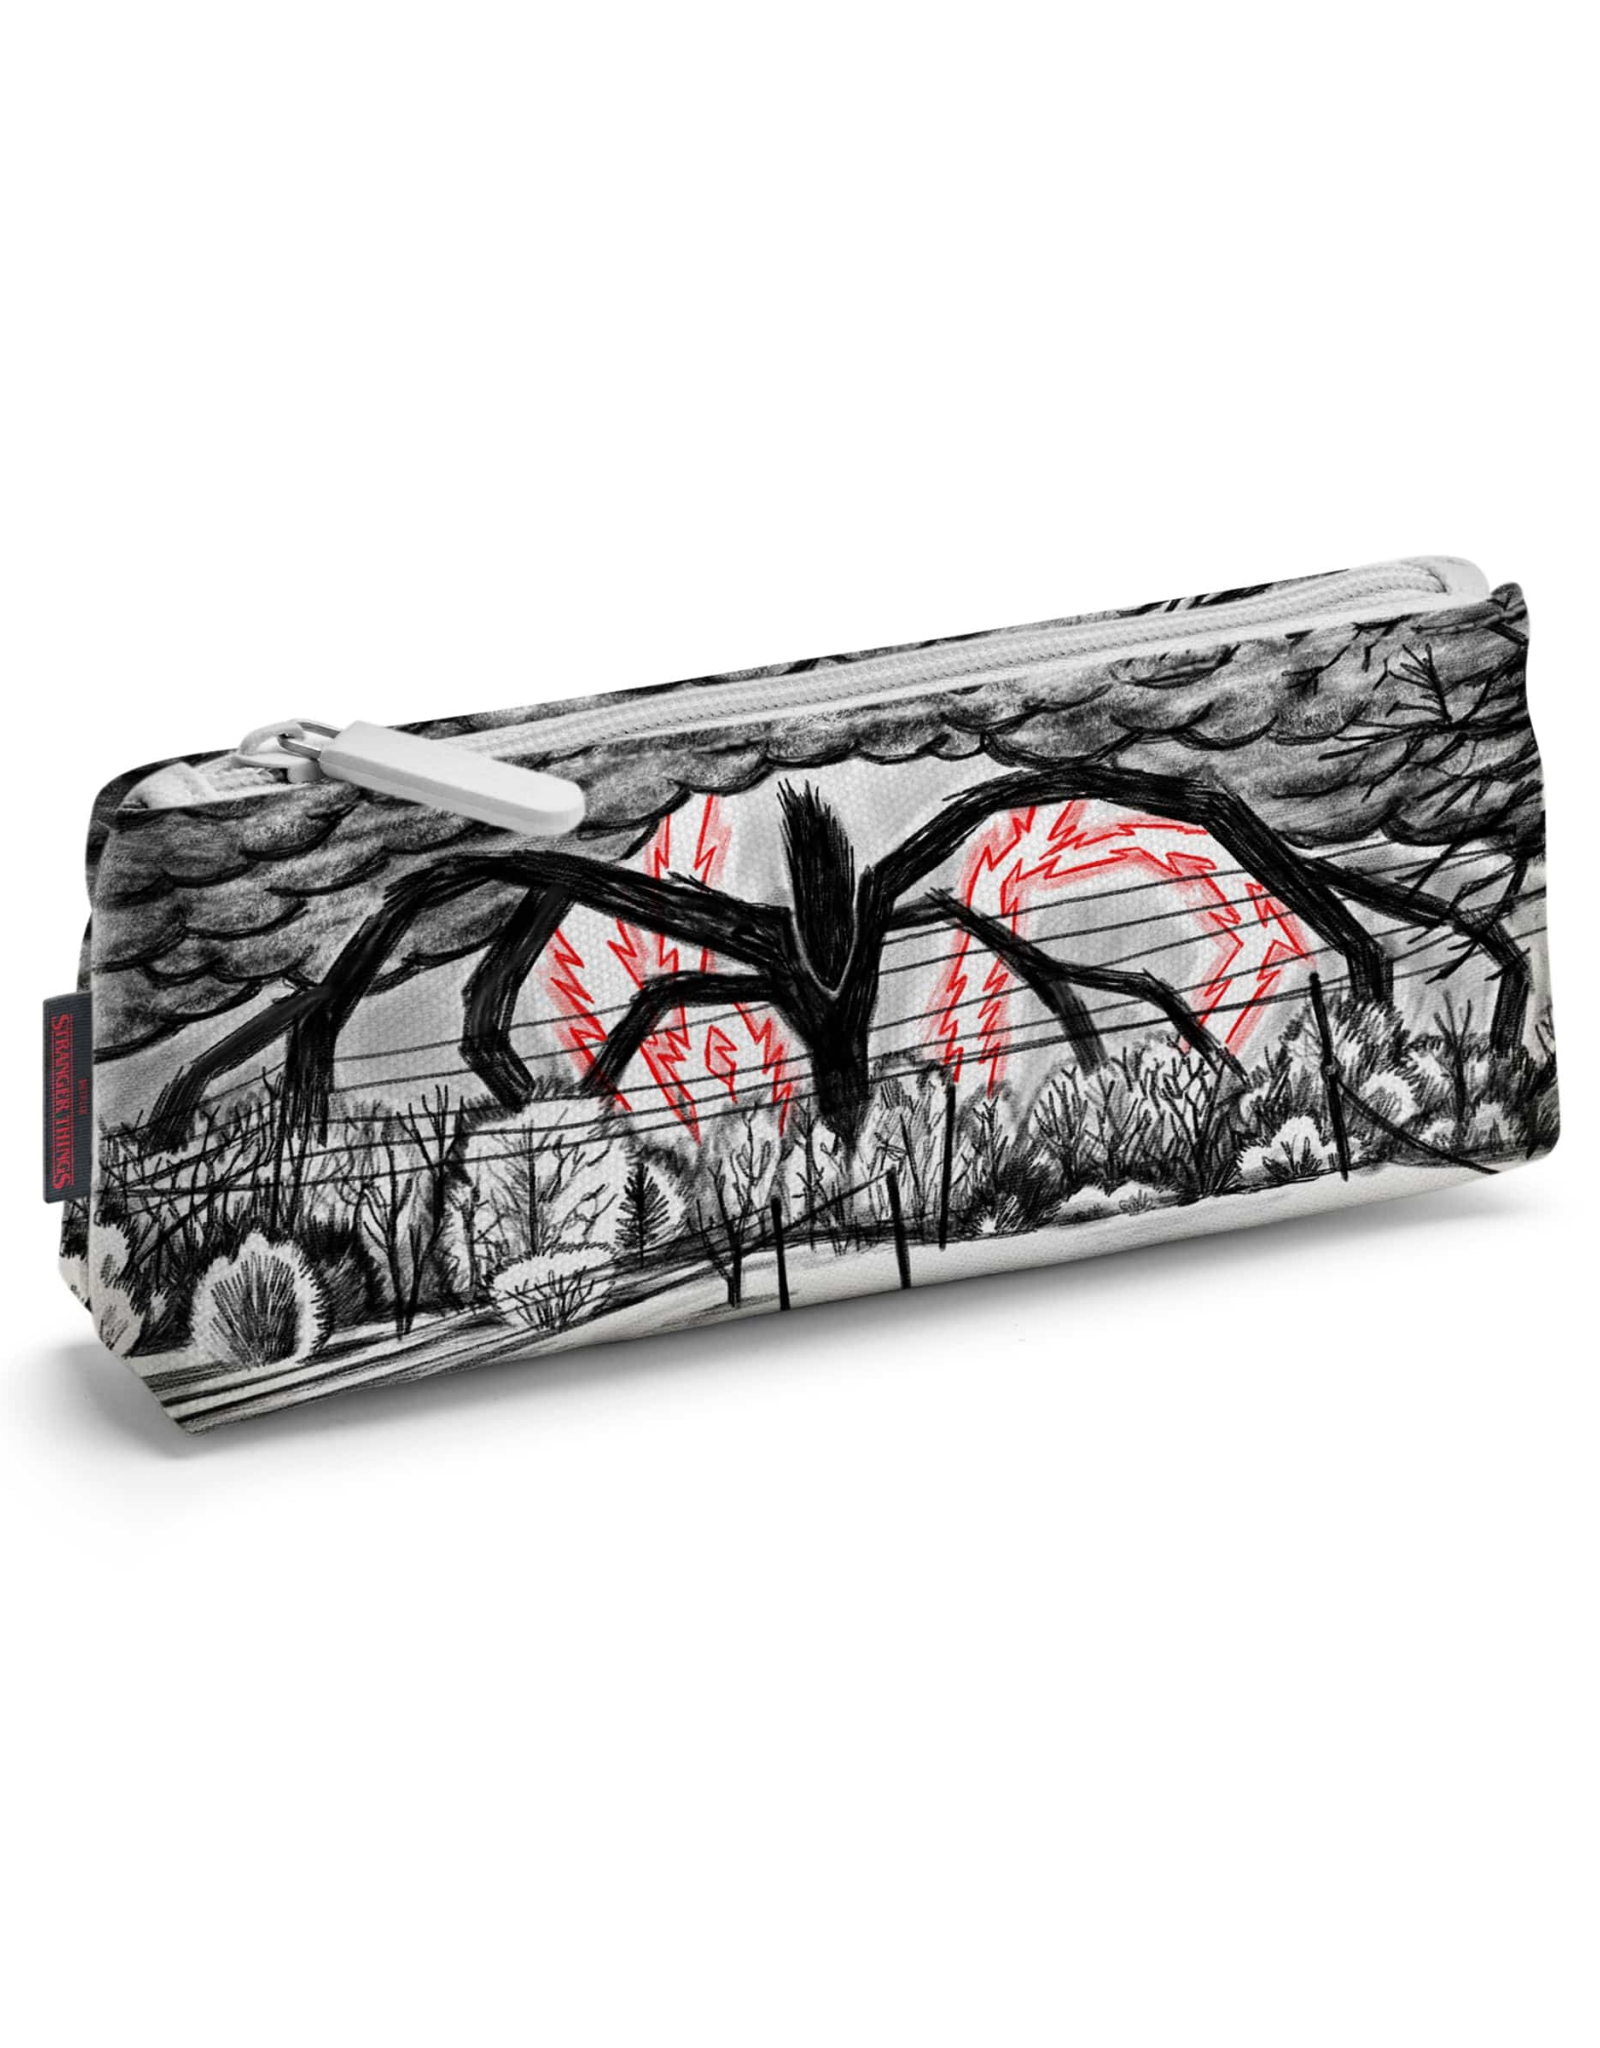 Mindflayer Accessory Pouch